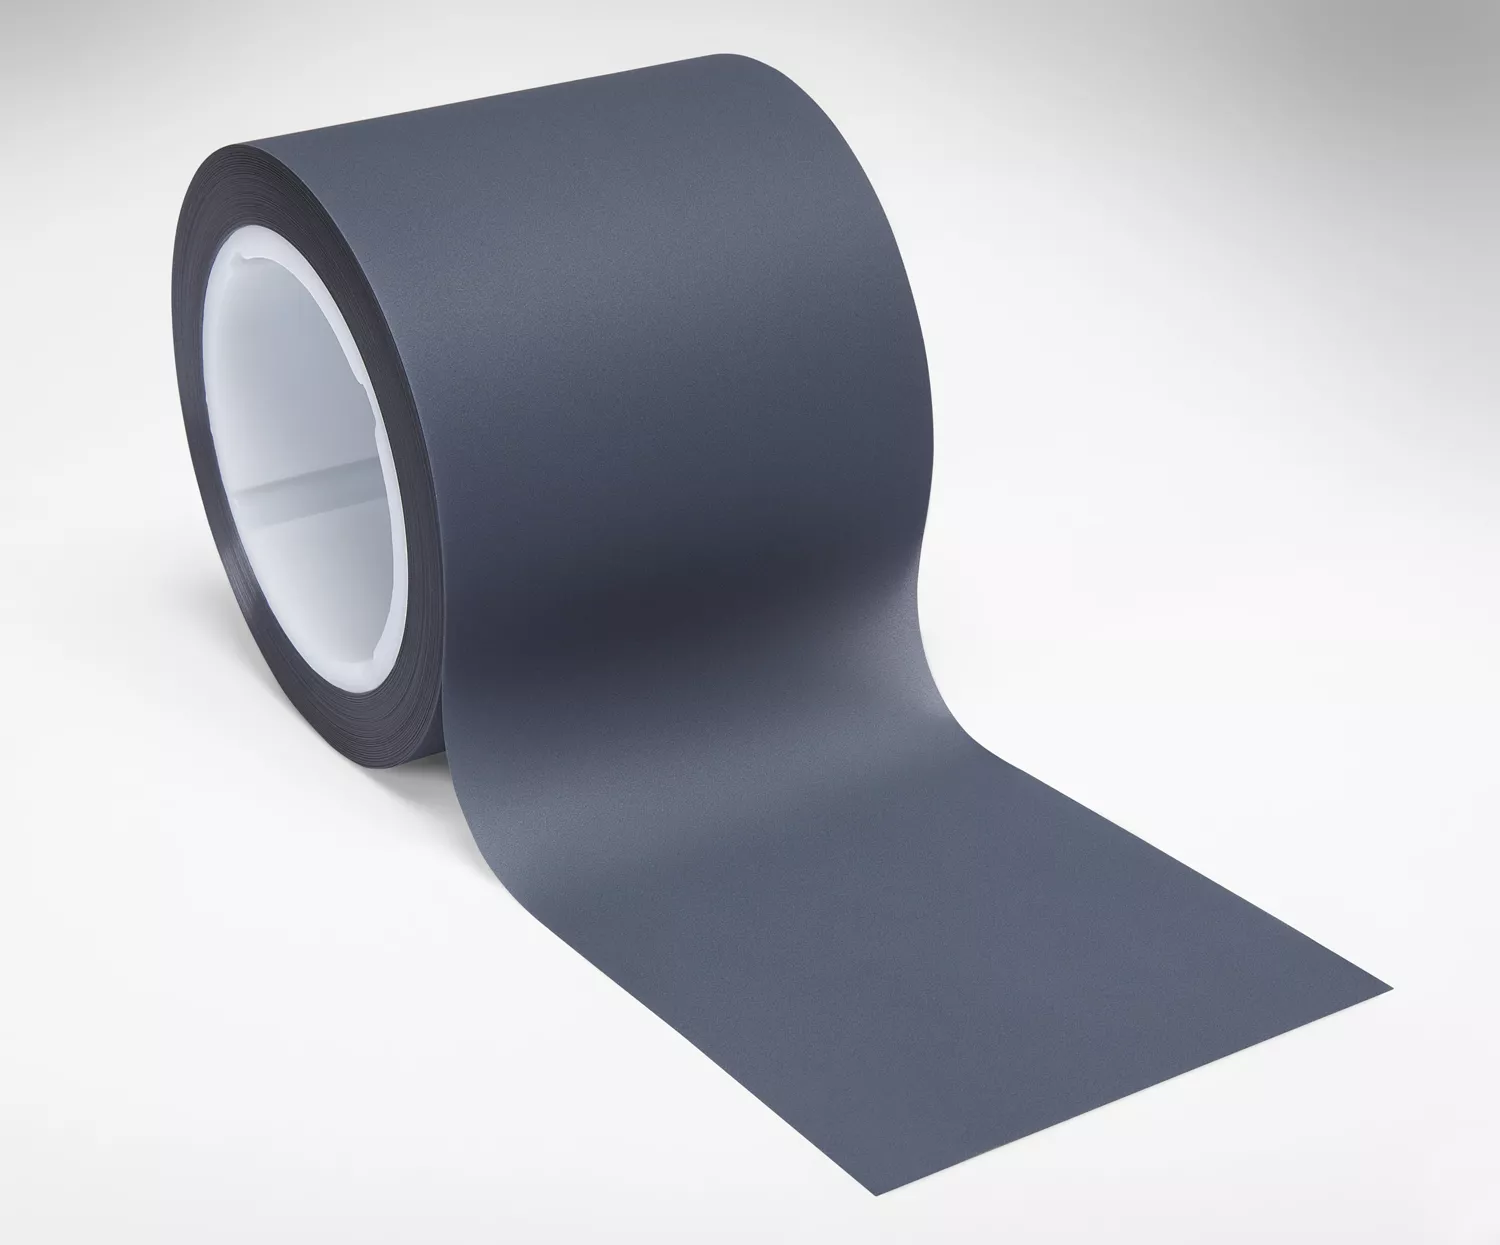 3M™ Lapping Film 461X, 15.0 Micron Roll, 4 in x 150 ft x 3 in ASO,
4/Case